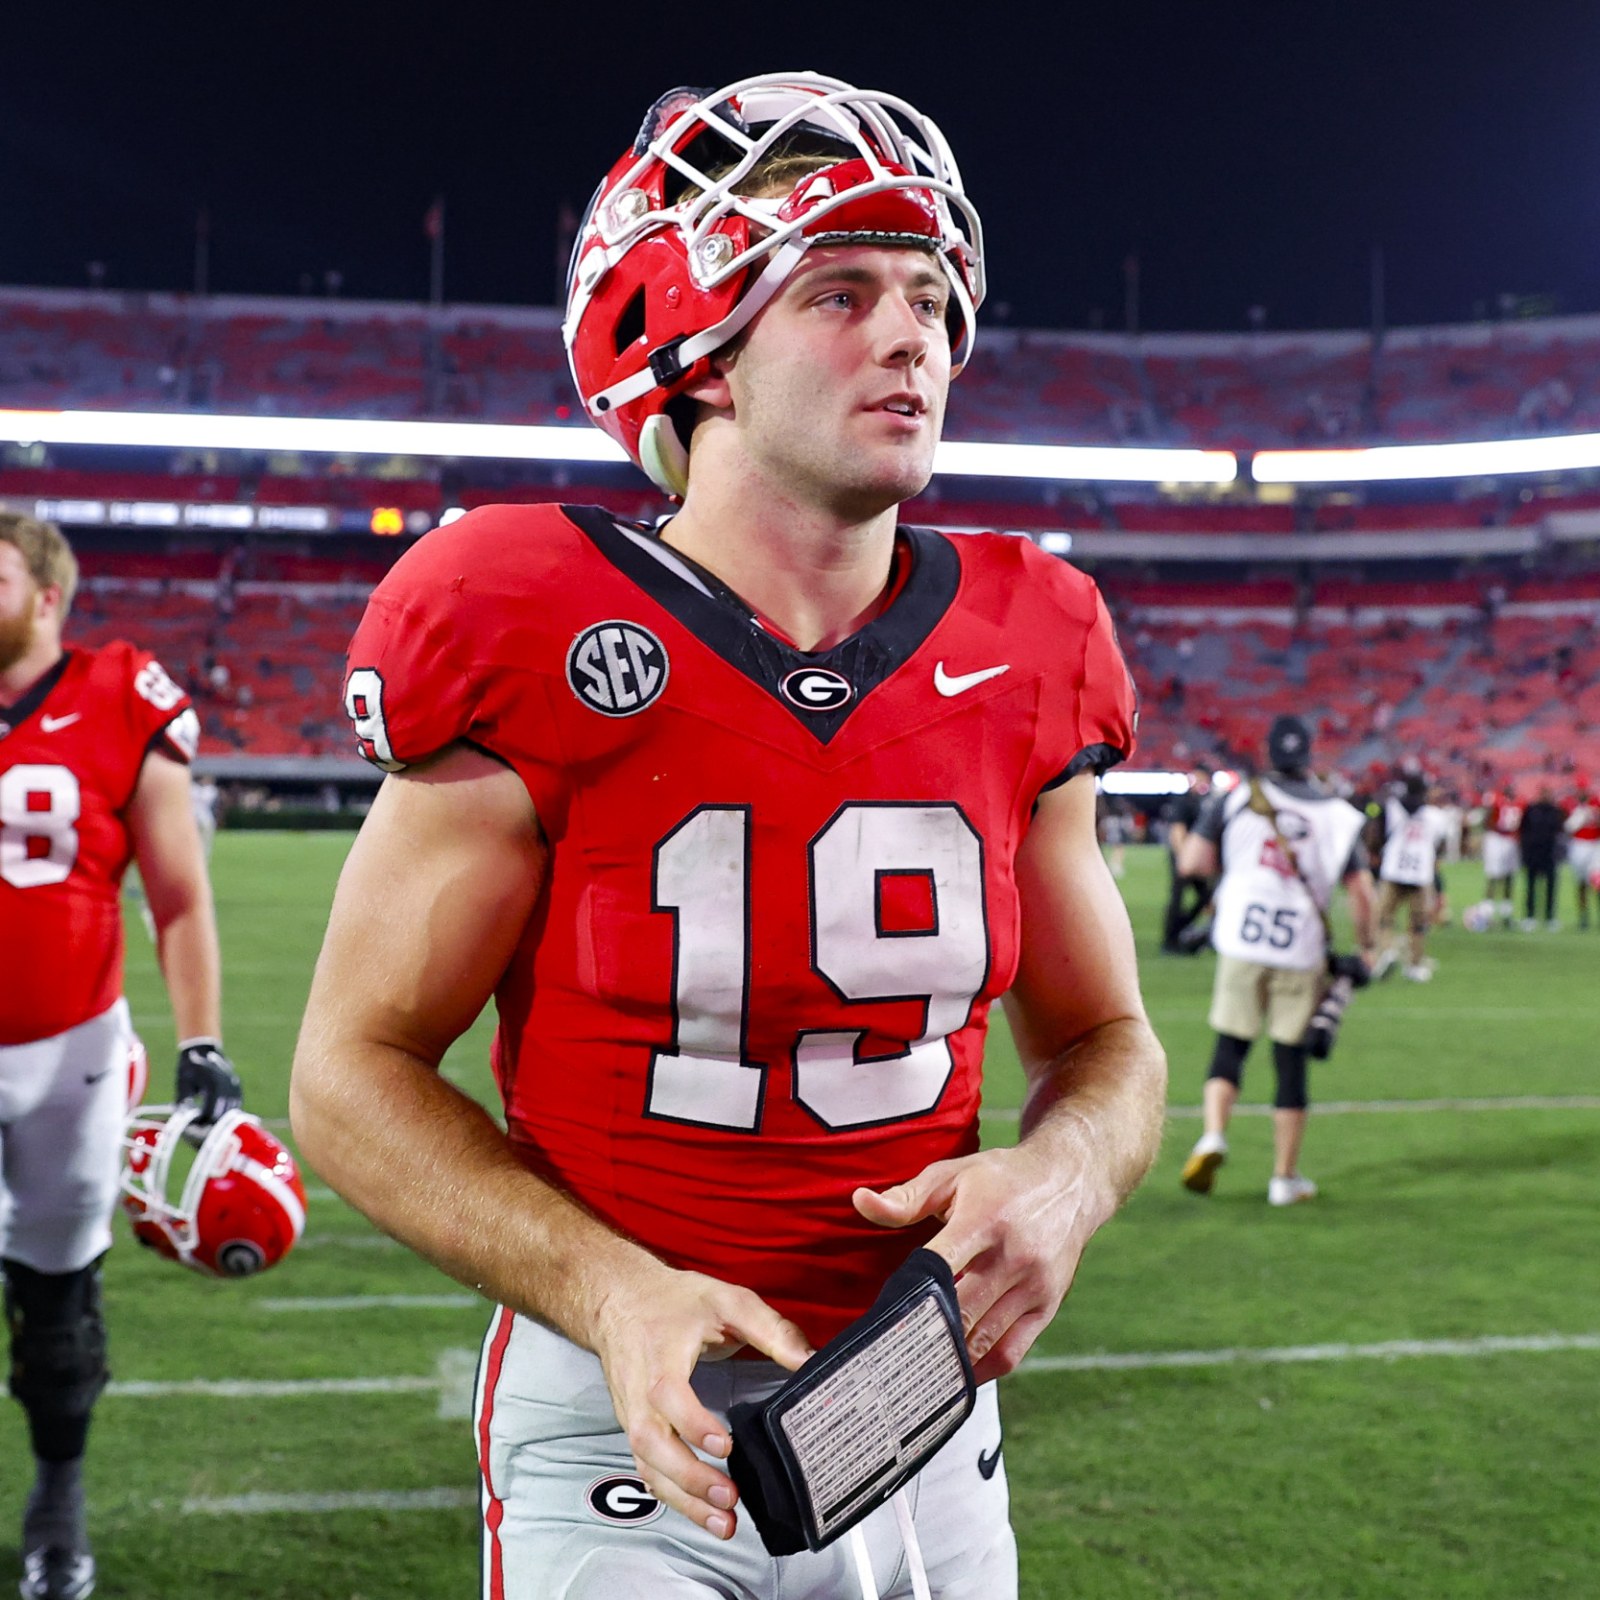 What We Know About UGA Tight End Brock Bowers' Injury